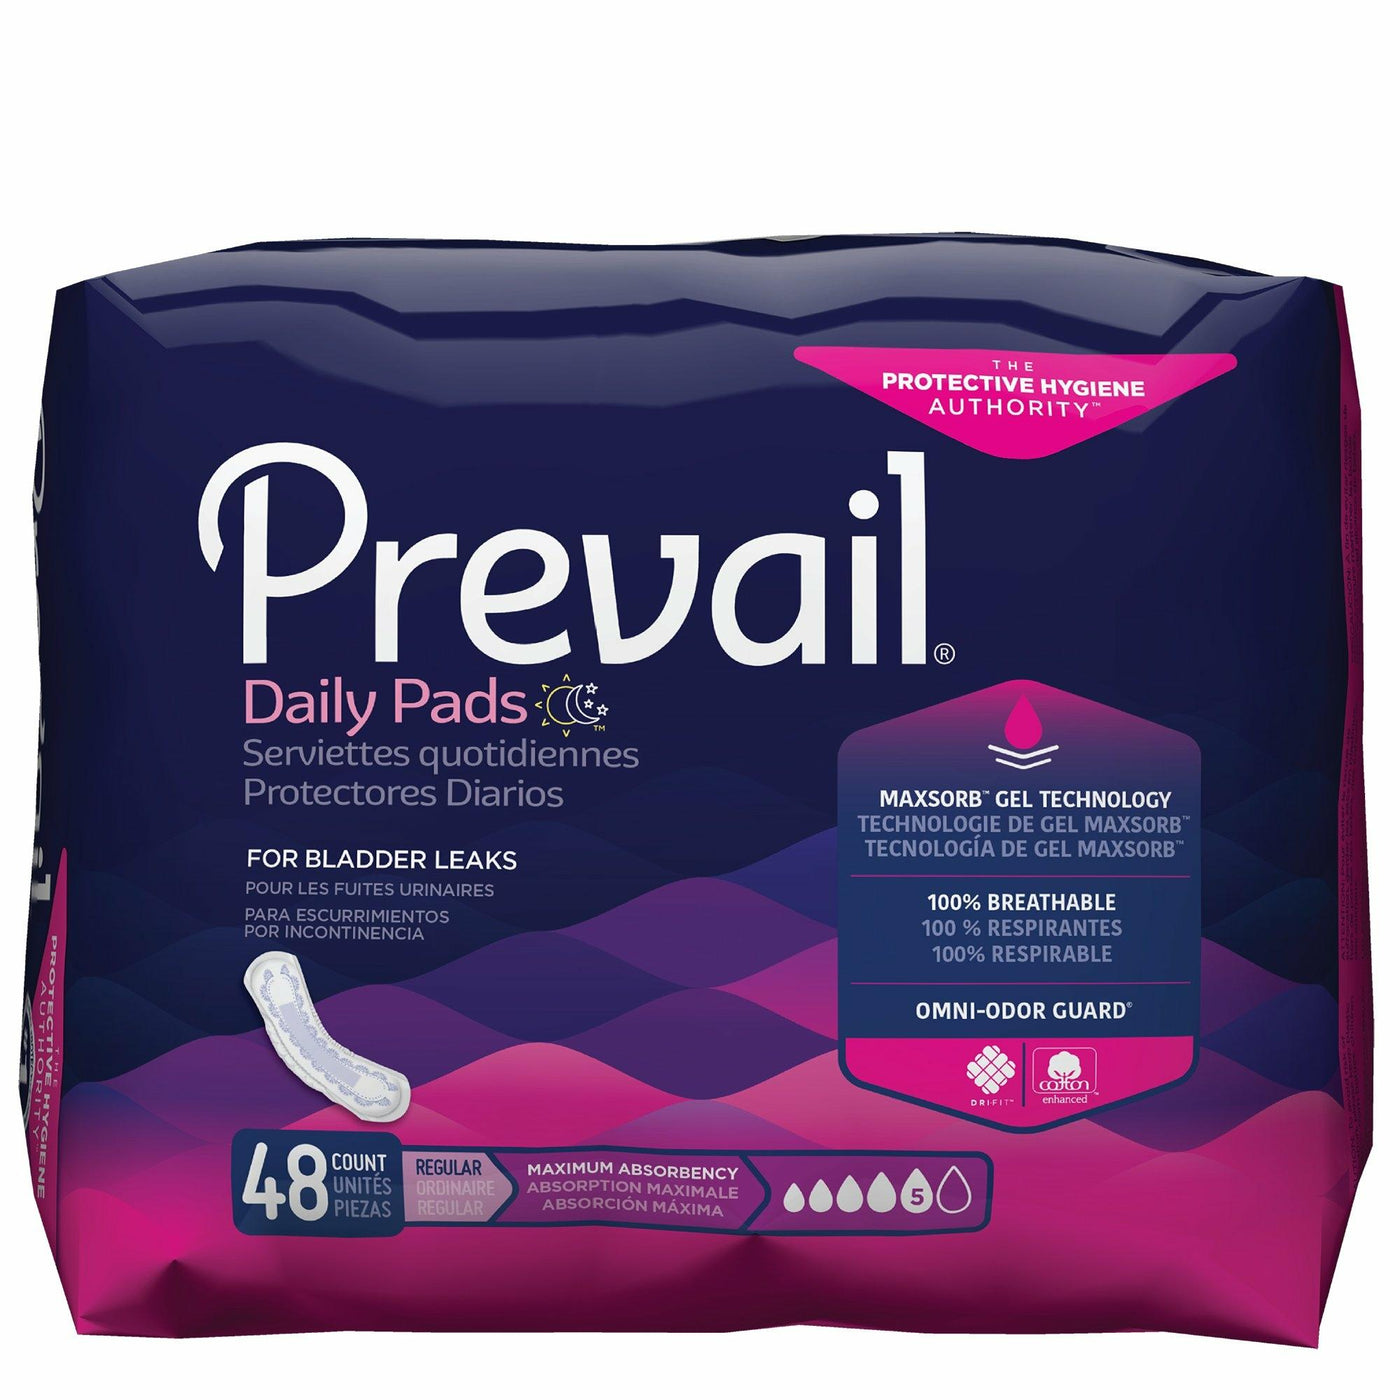 Prevail Incontinence Protective Underwear for Women, Maximum